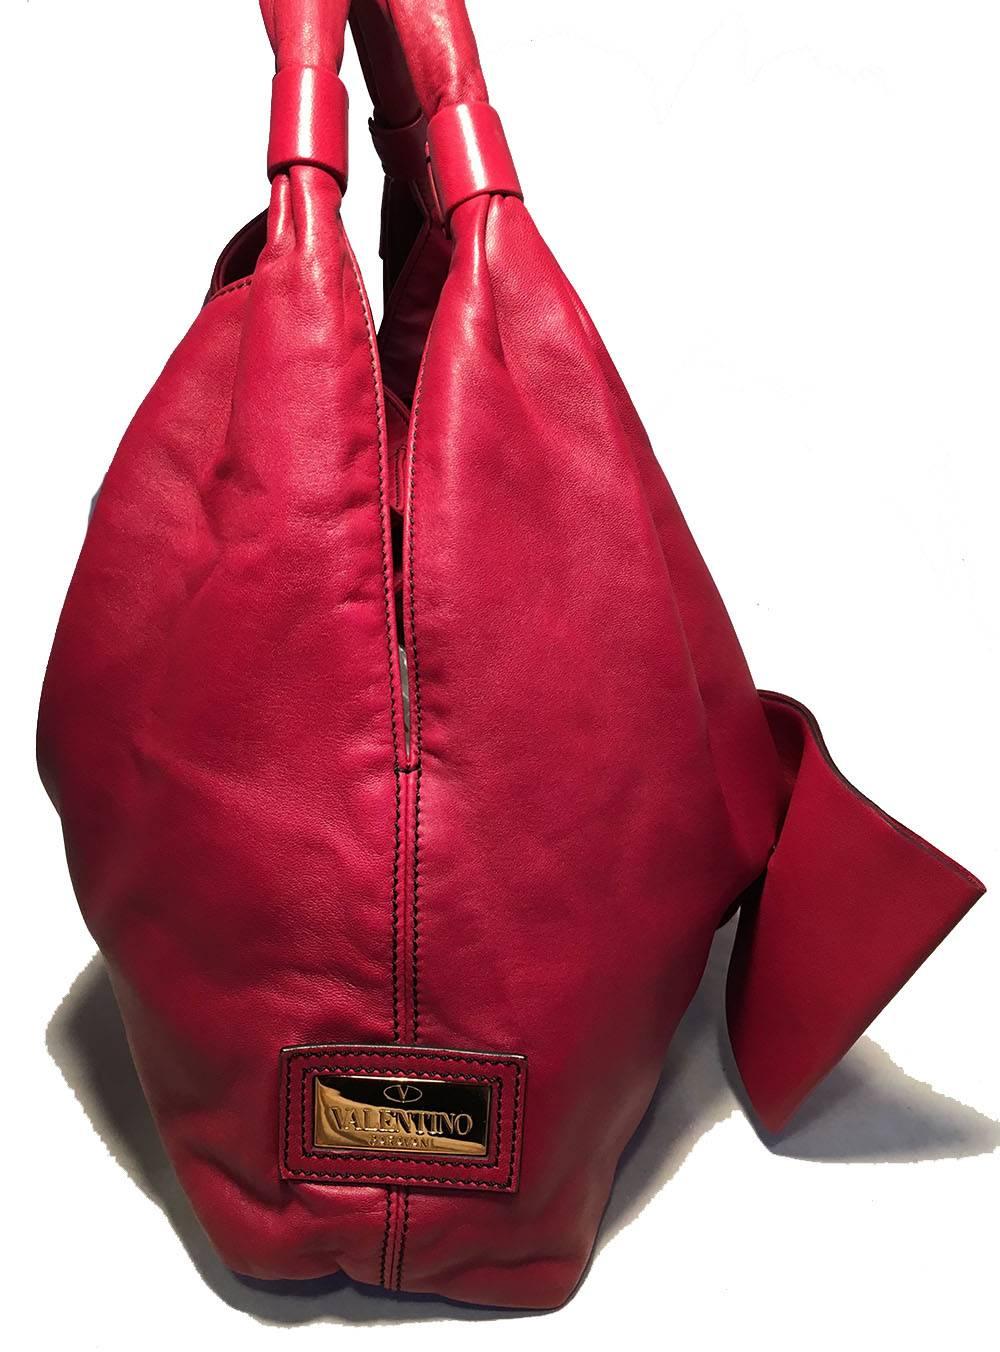 BEAUTIFUL Valentino Red Leather Bow Front Hobo Shoulder Bag in very good condition.  Soft red leather exterior with an amazing leather bow detail along the front side and soft double shoulder straps for comfortable carrying. Black satin lined